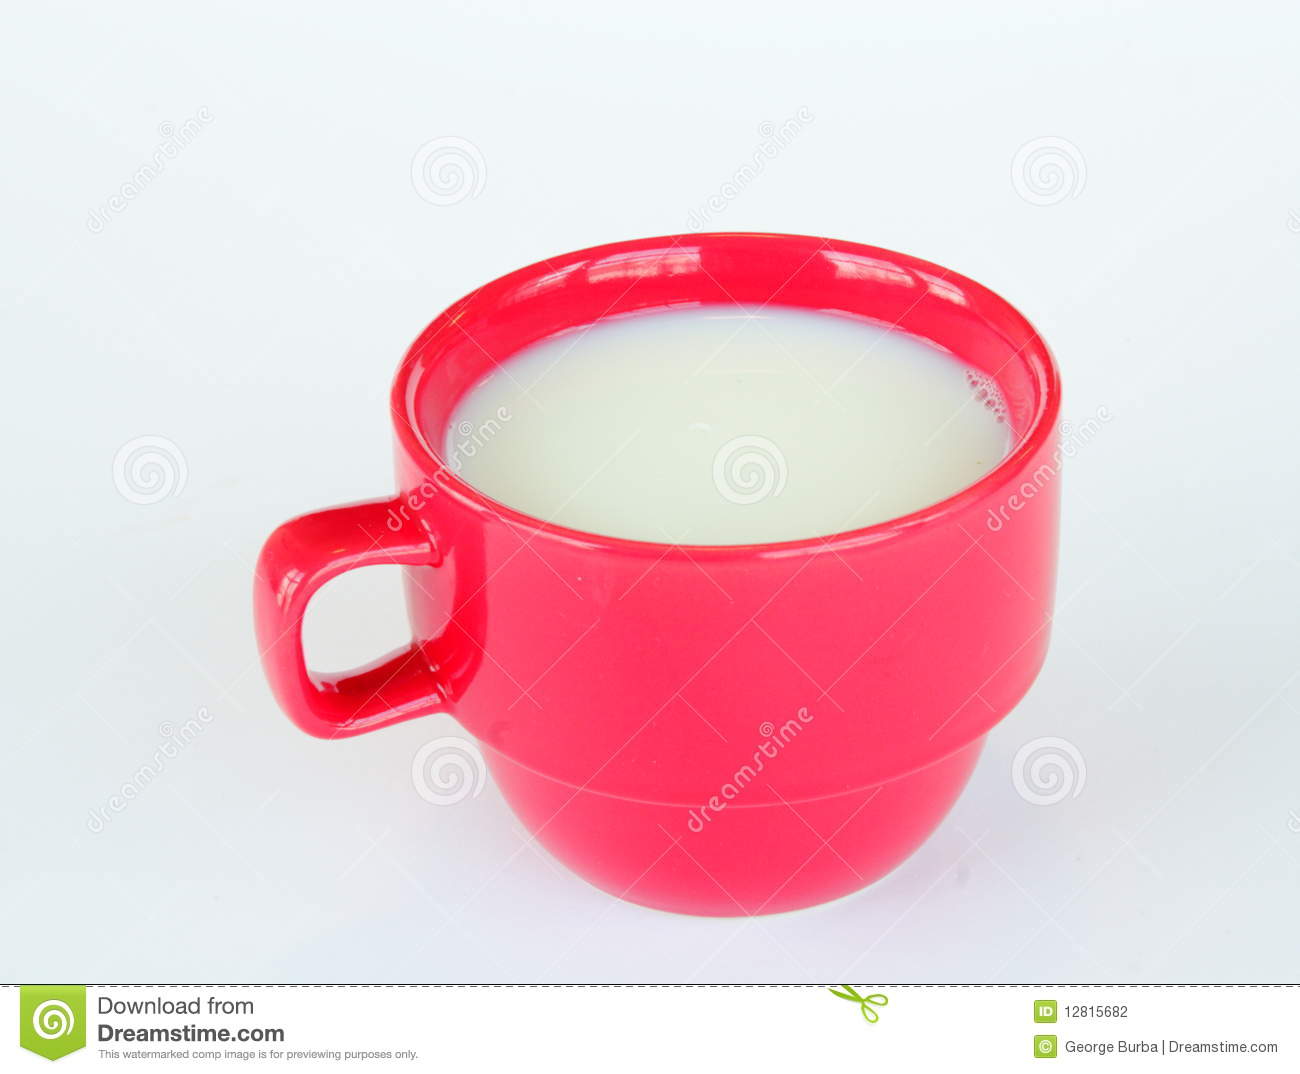 The Cup Full Of Milk Or Cream On Light Background 